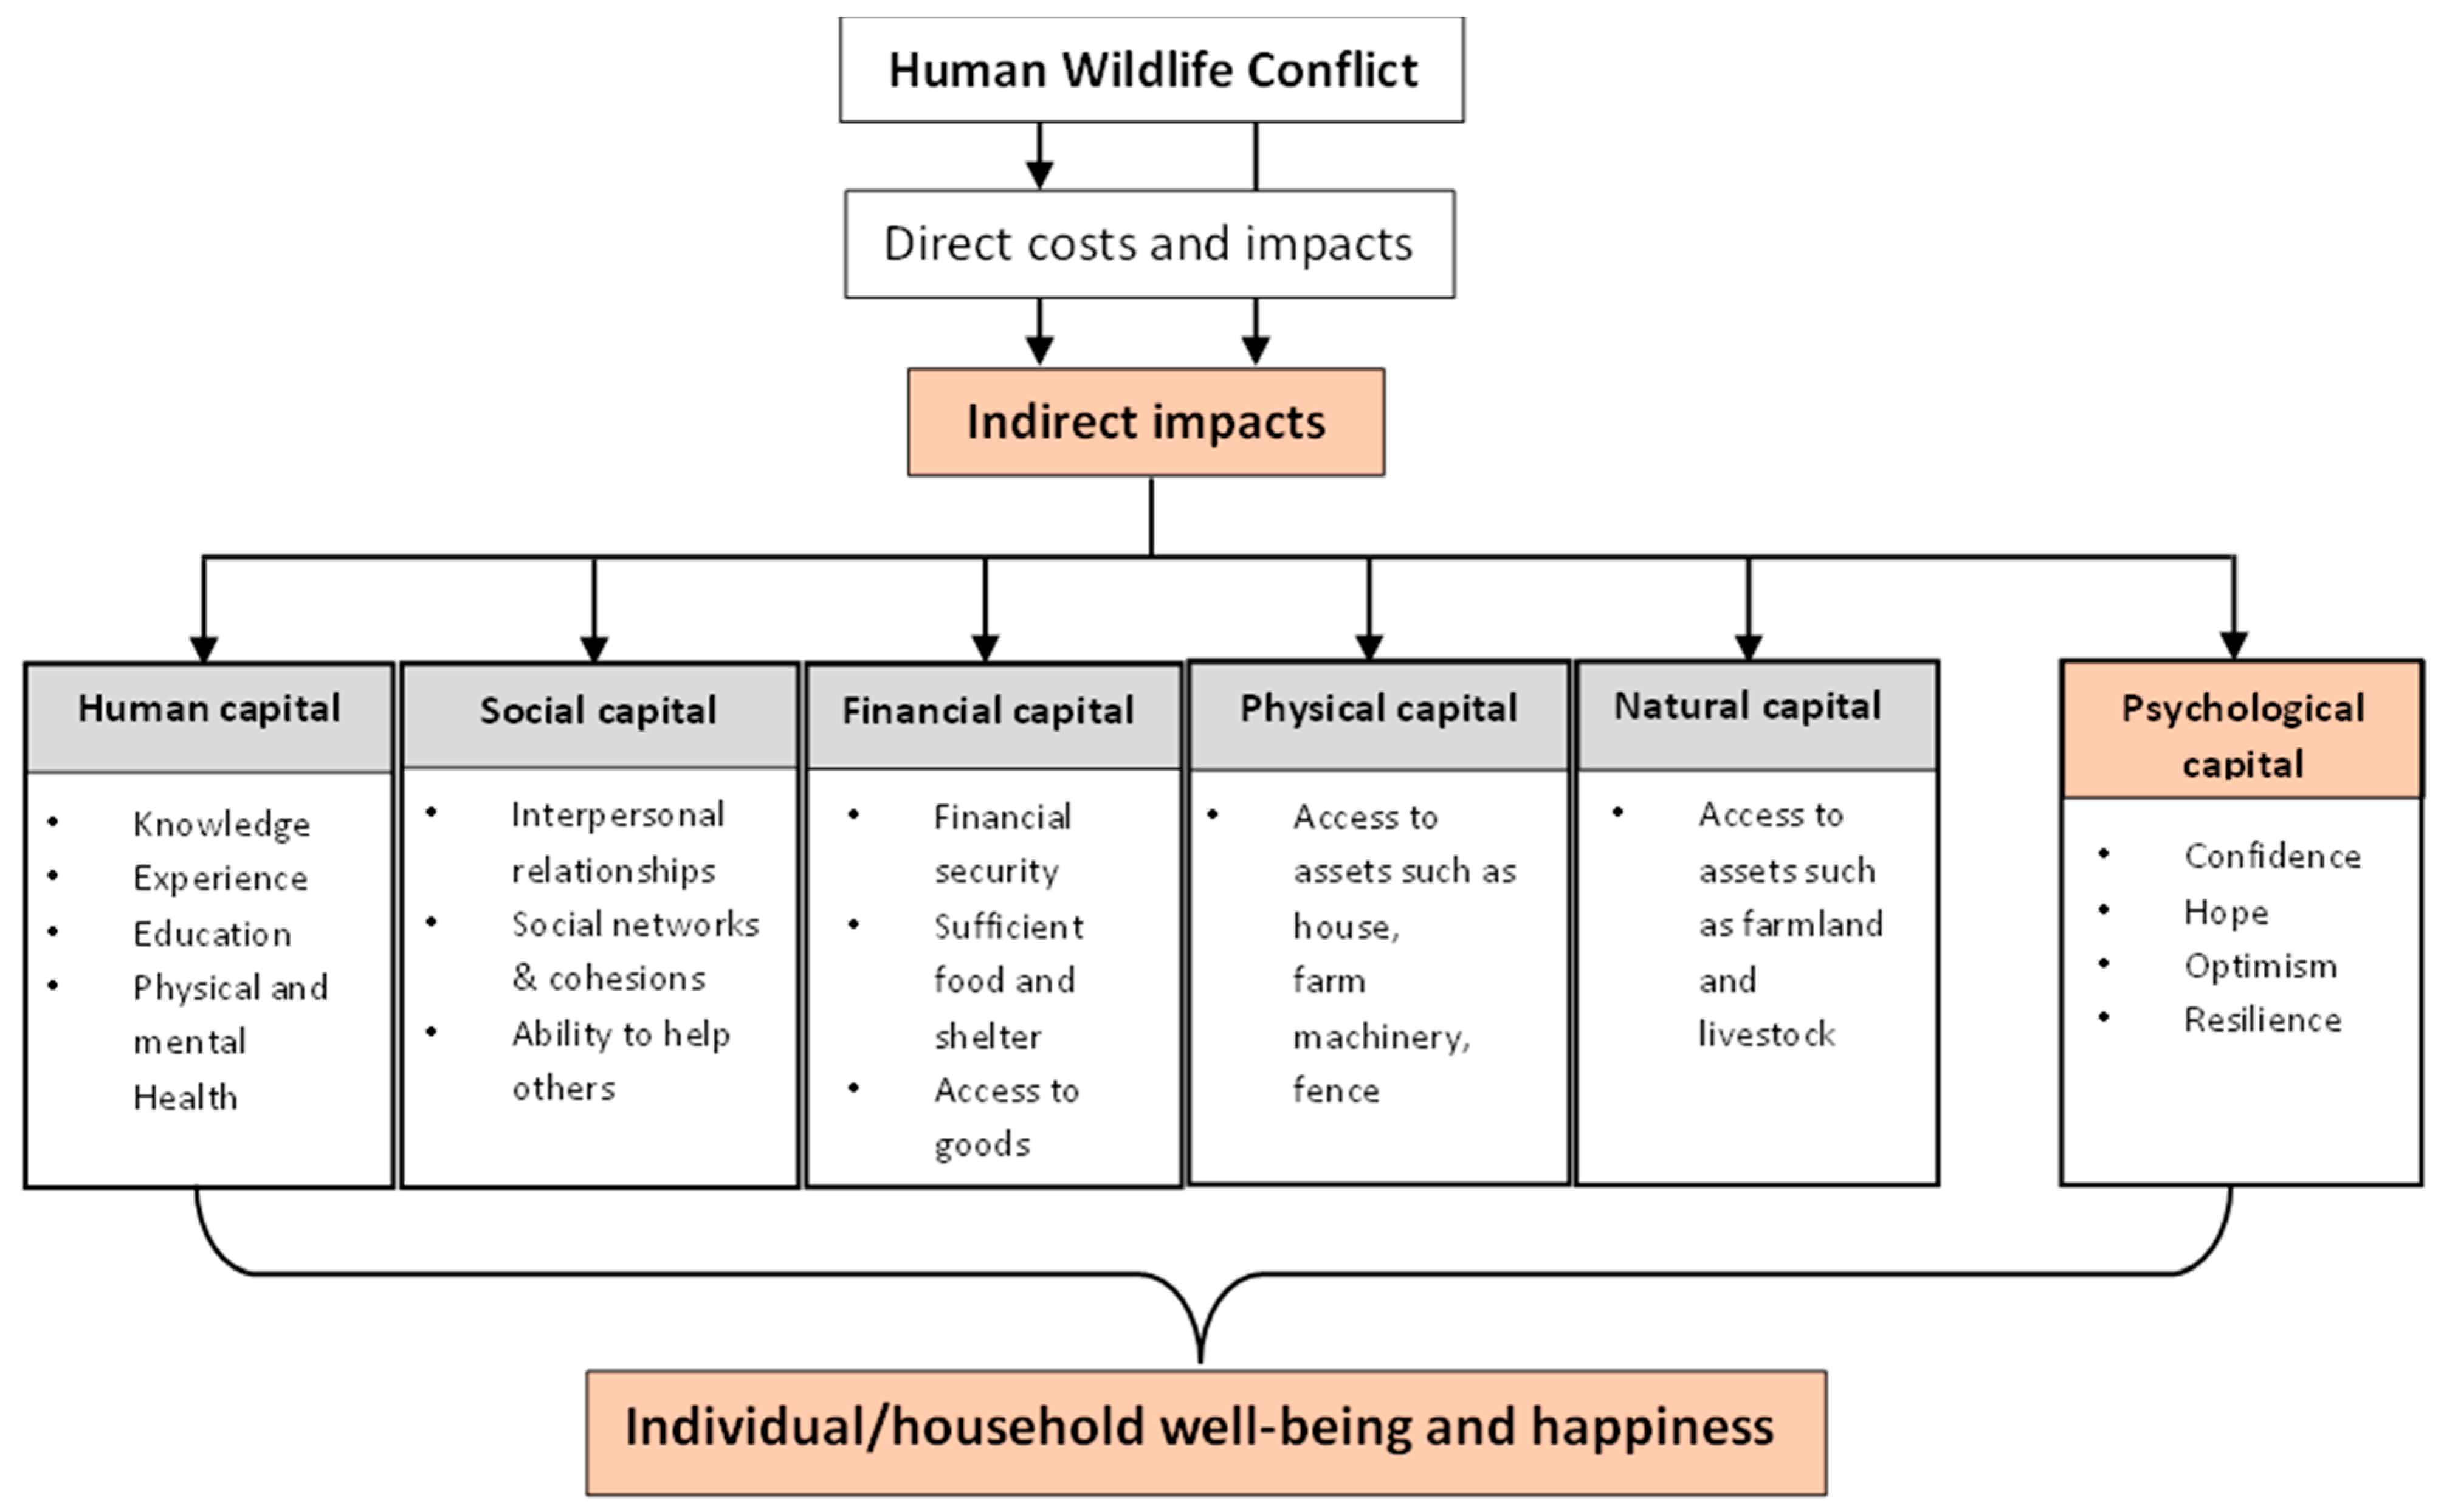 III. Impacts of Human-Wildlife Conflict on Agriculture